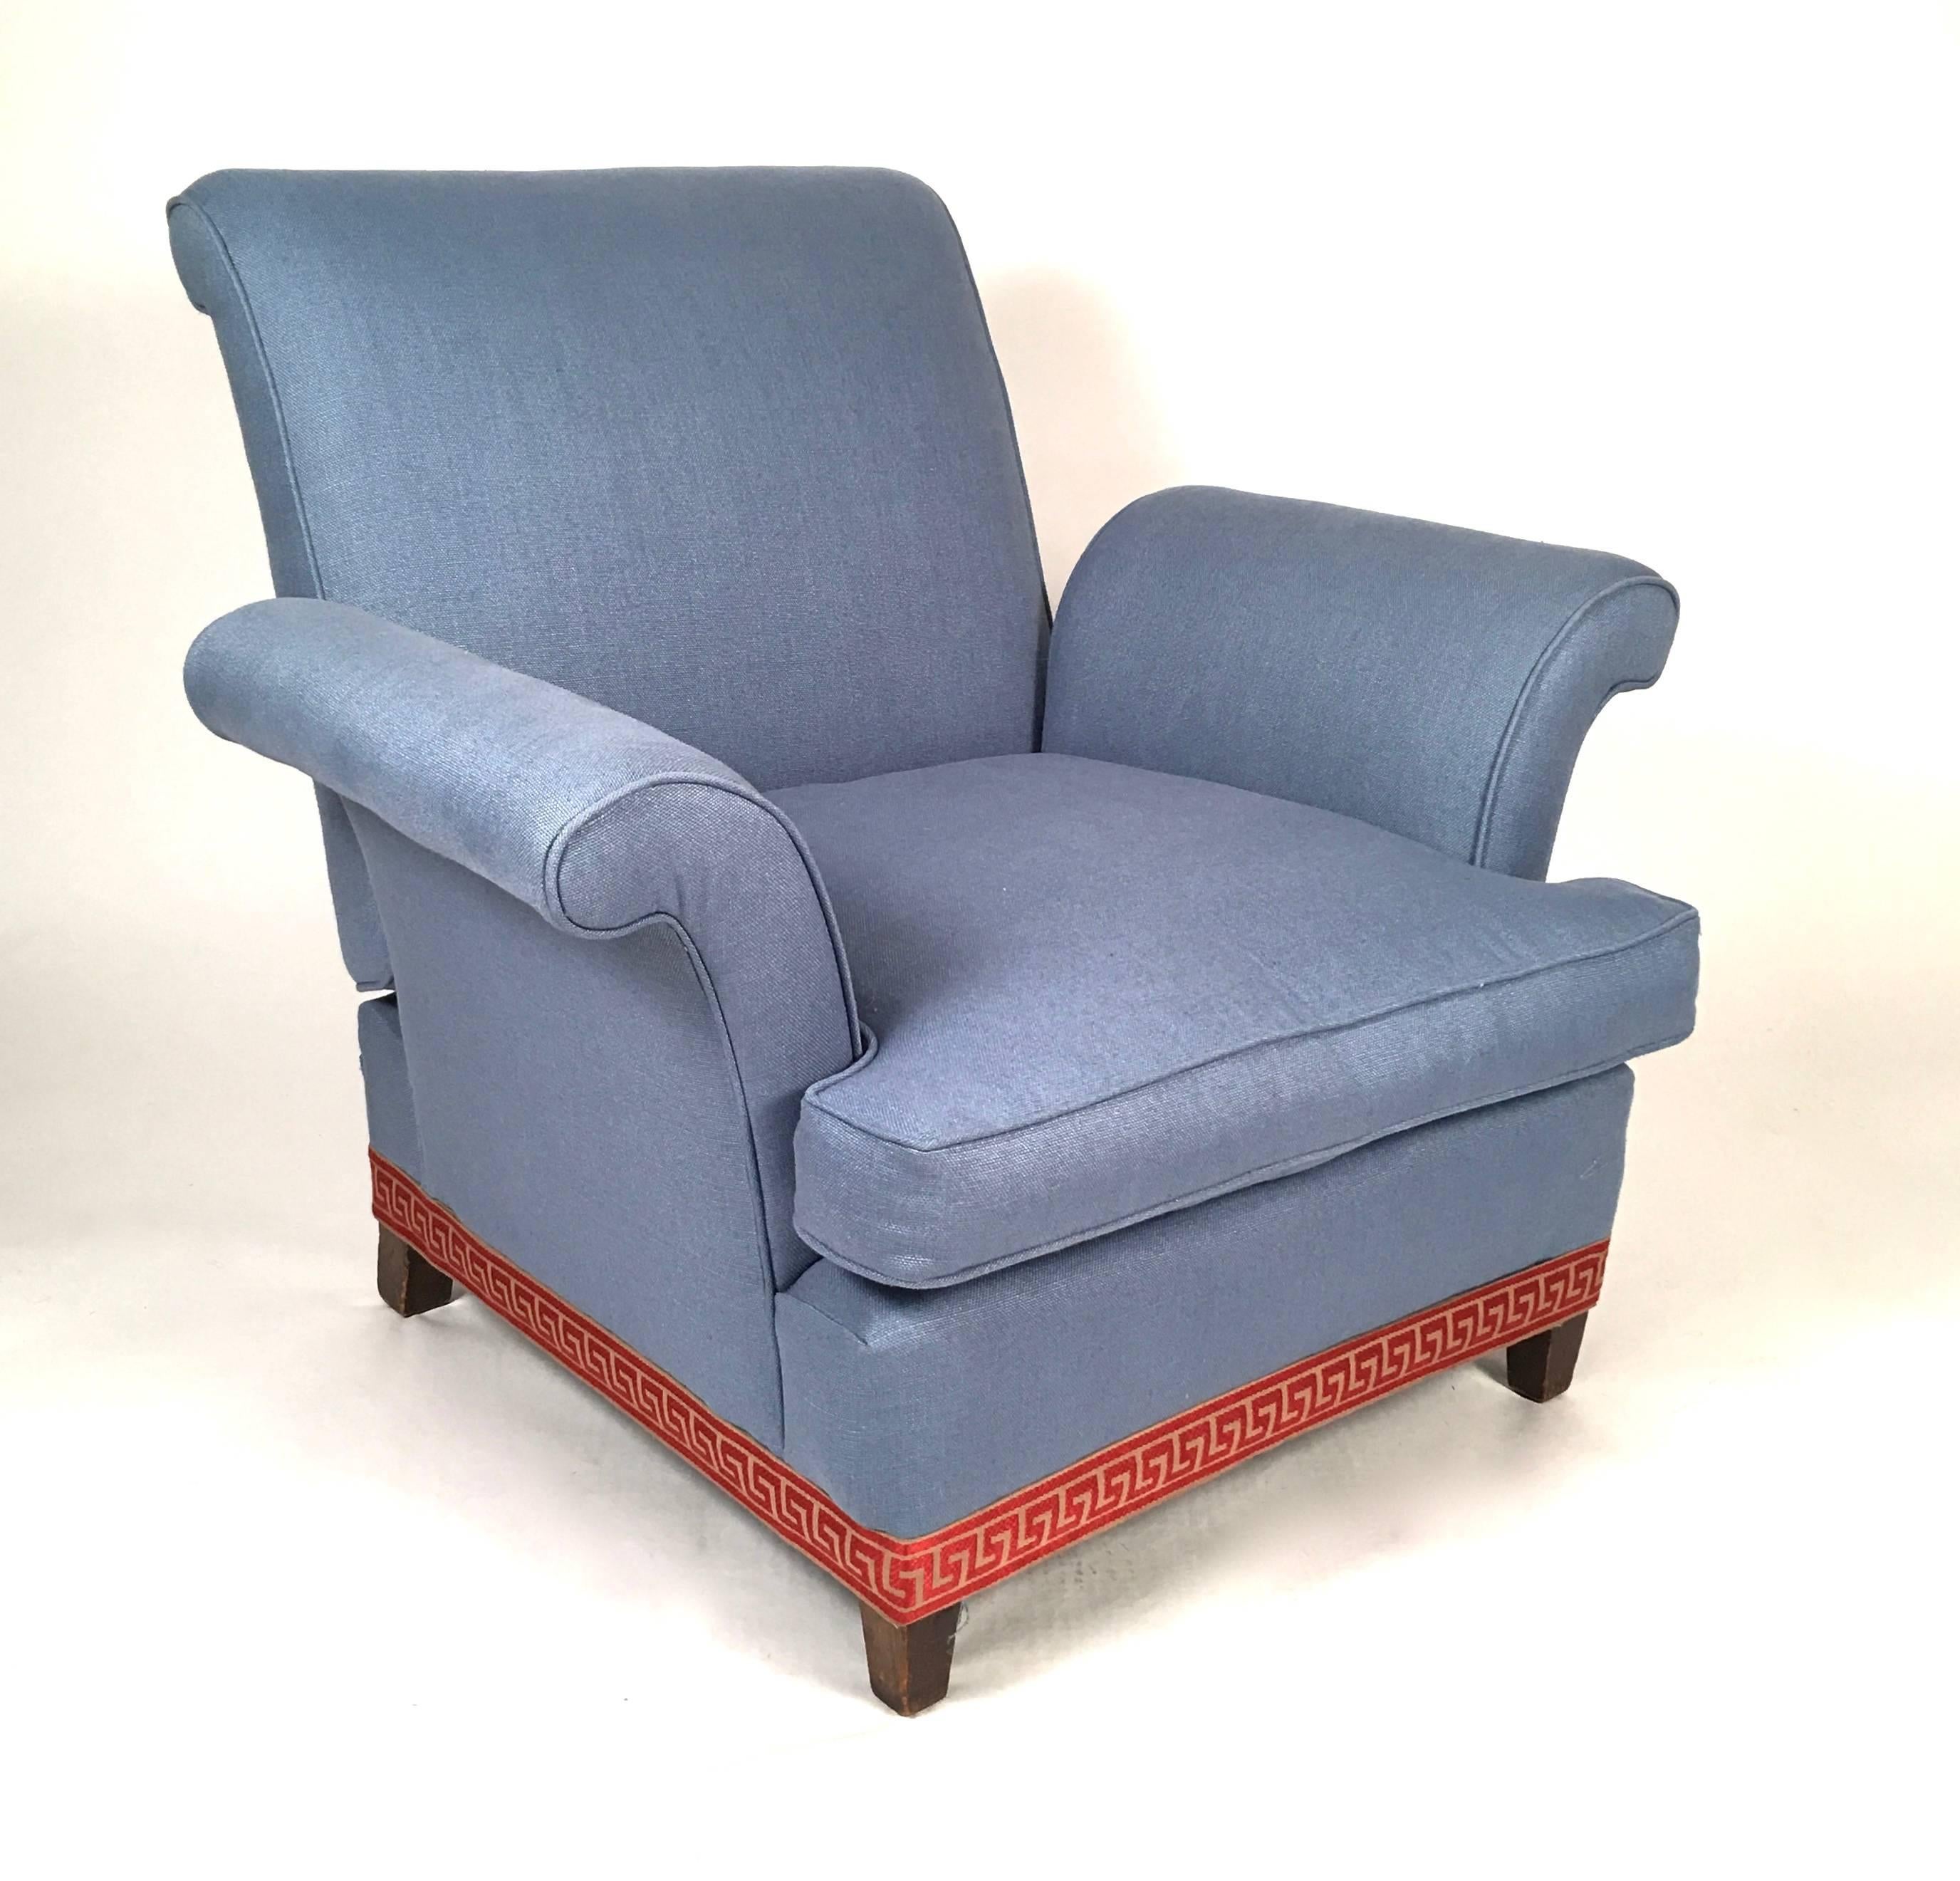 A vintage club chair with scrolled arms and a reclining back, which may be angled in several positions with the lever on the back which lifts up, recently re-upholstered in blue linen/cotton, with down-filled loose seat cushion and terra cotta Greek